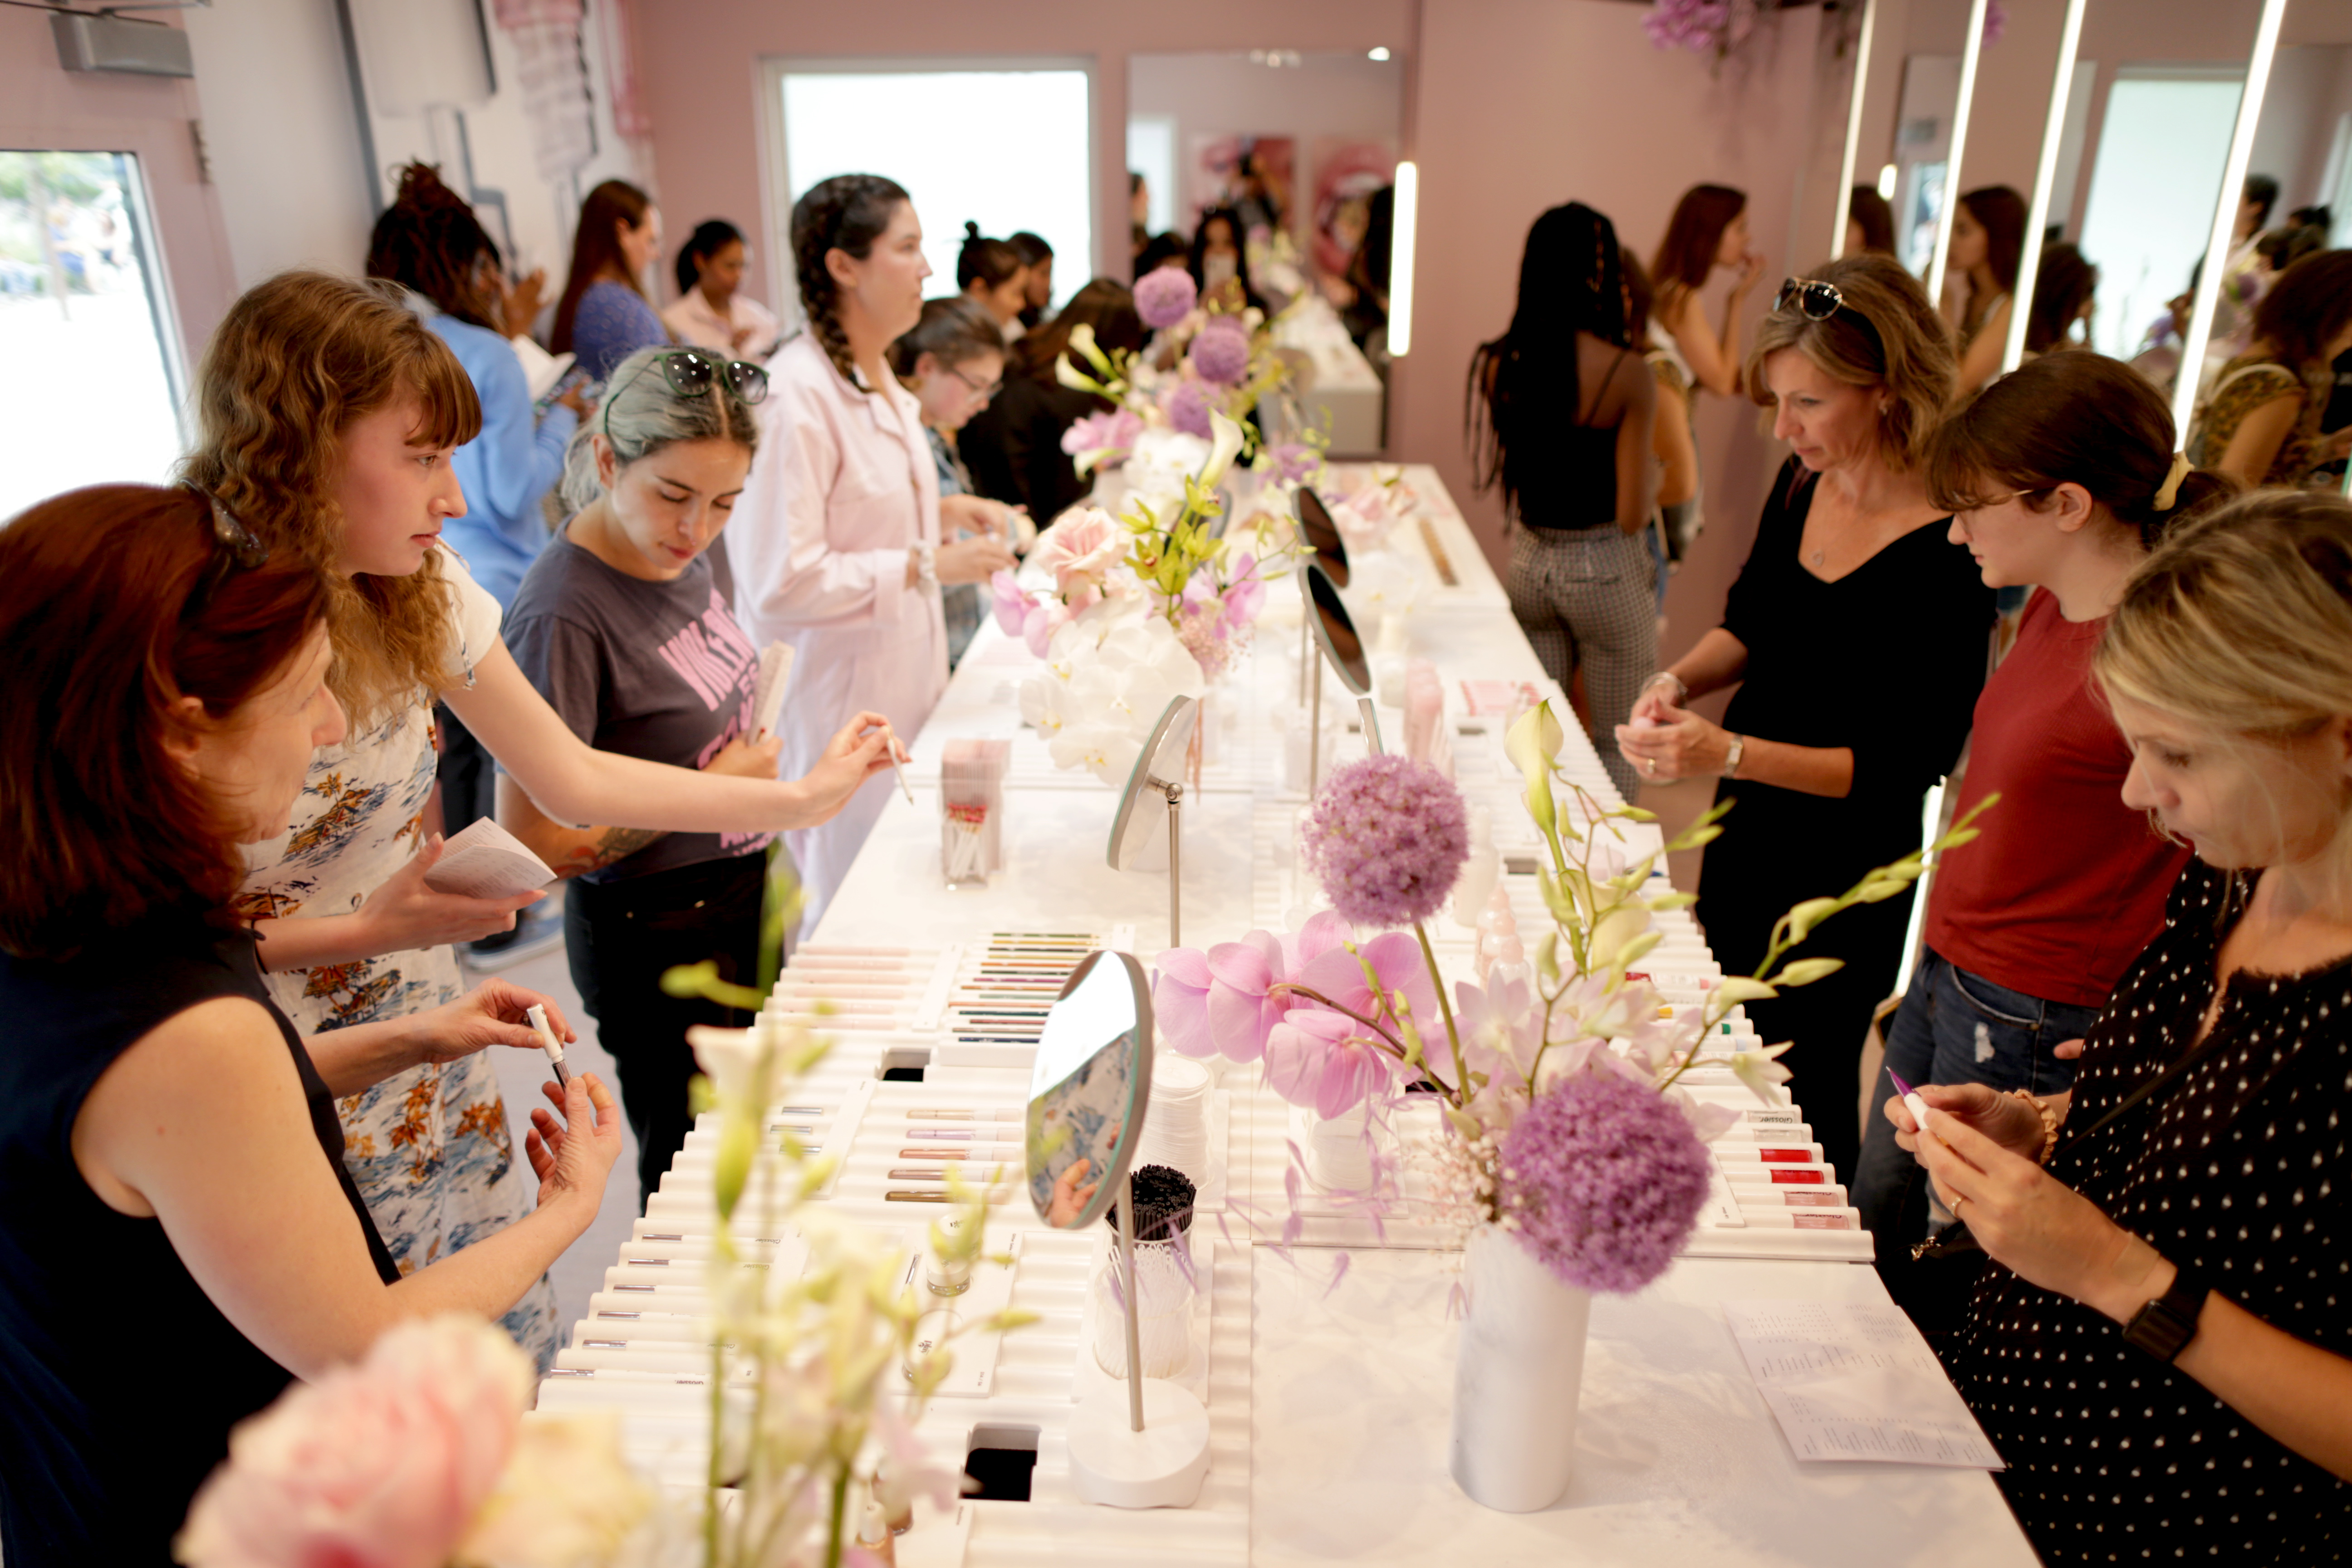 Glossier’s pop-up in Boston earlier this summer